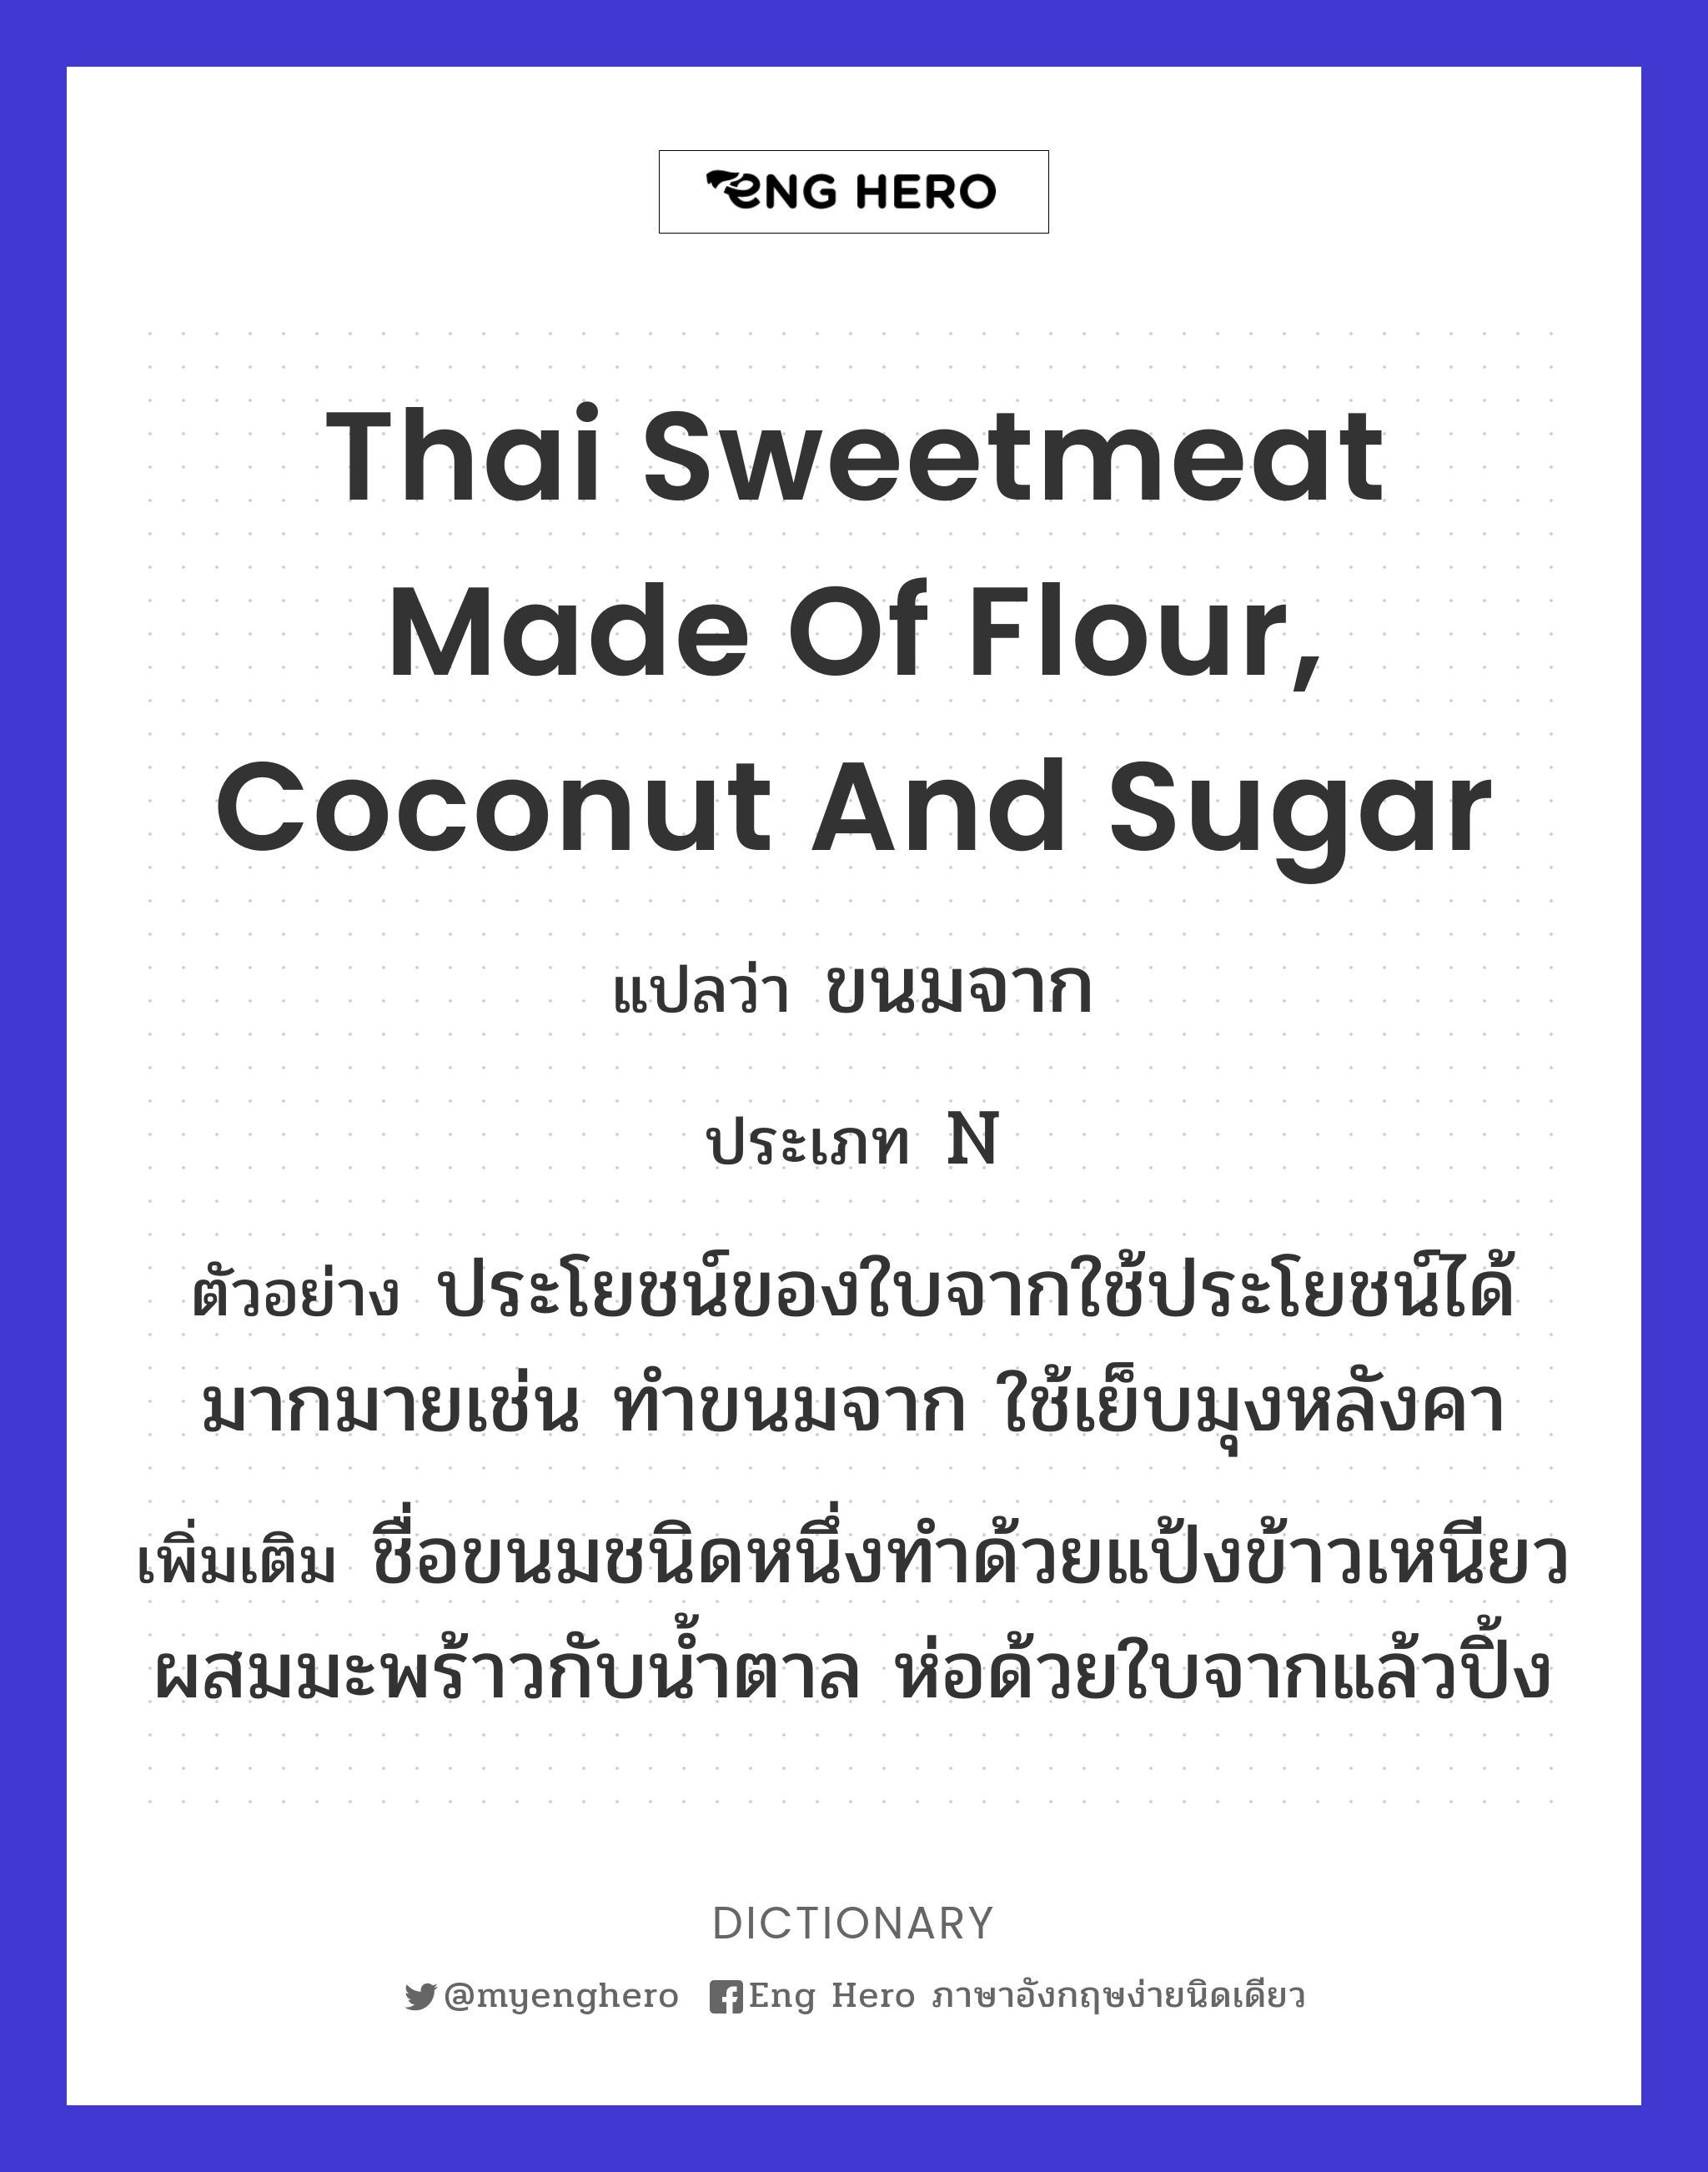 Thai sweetmeat made of flour, coconut and sugar